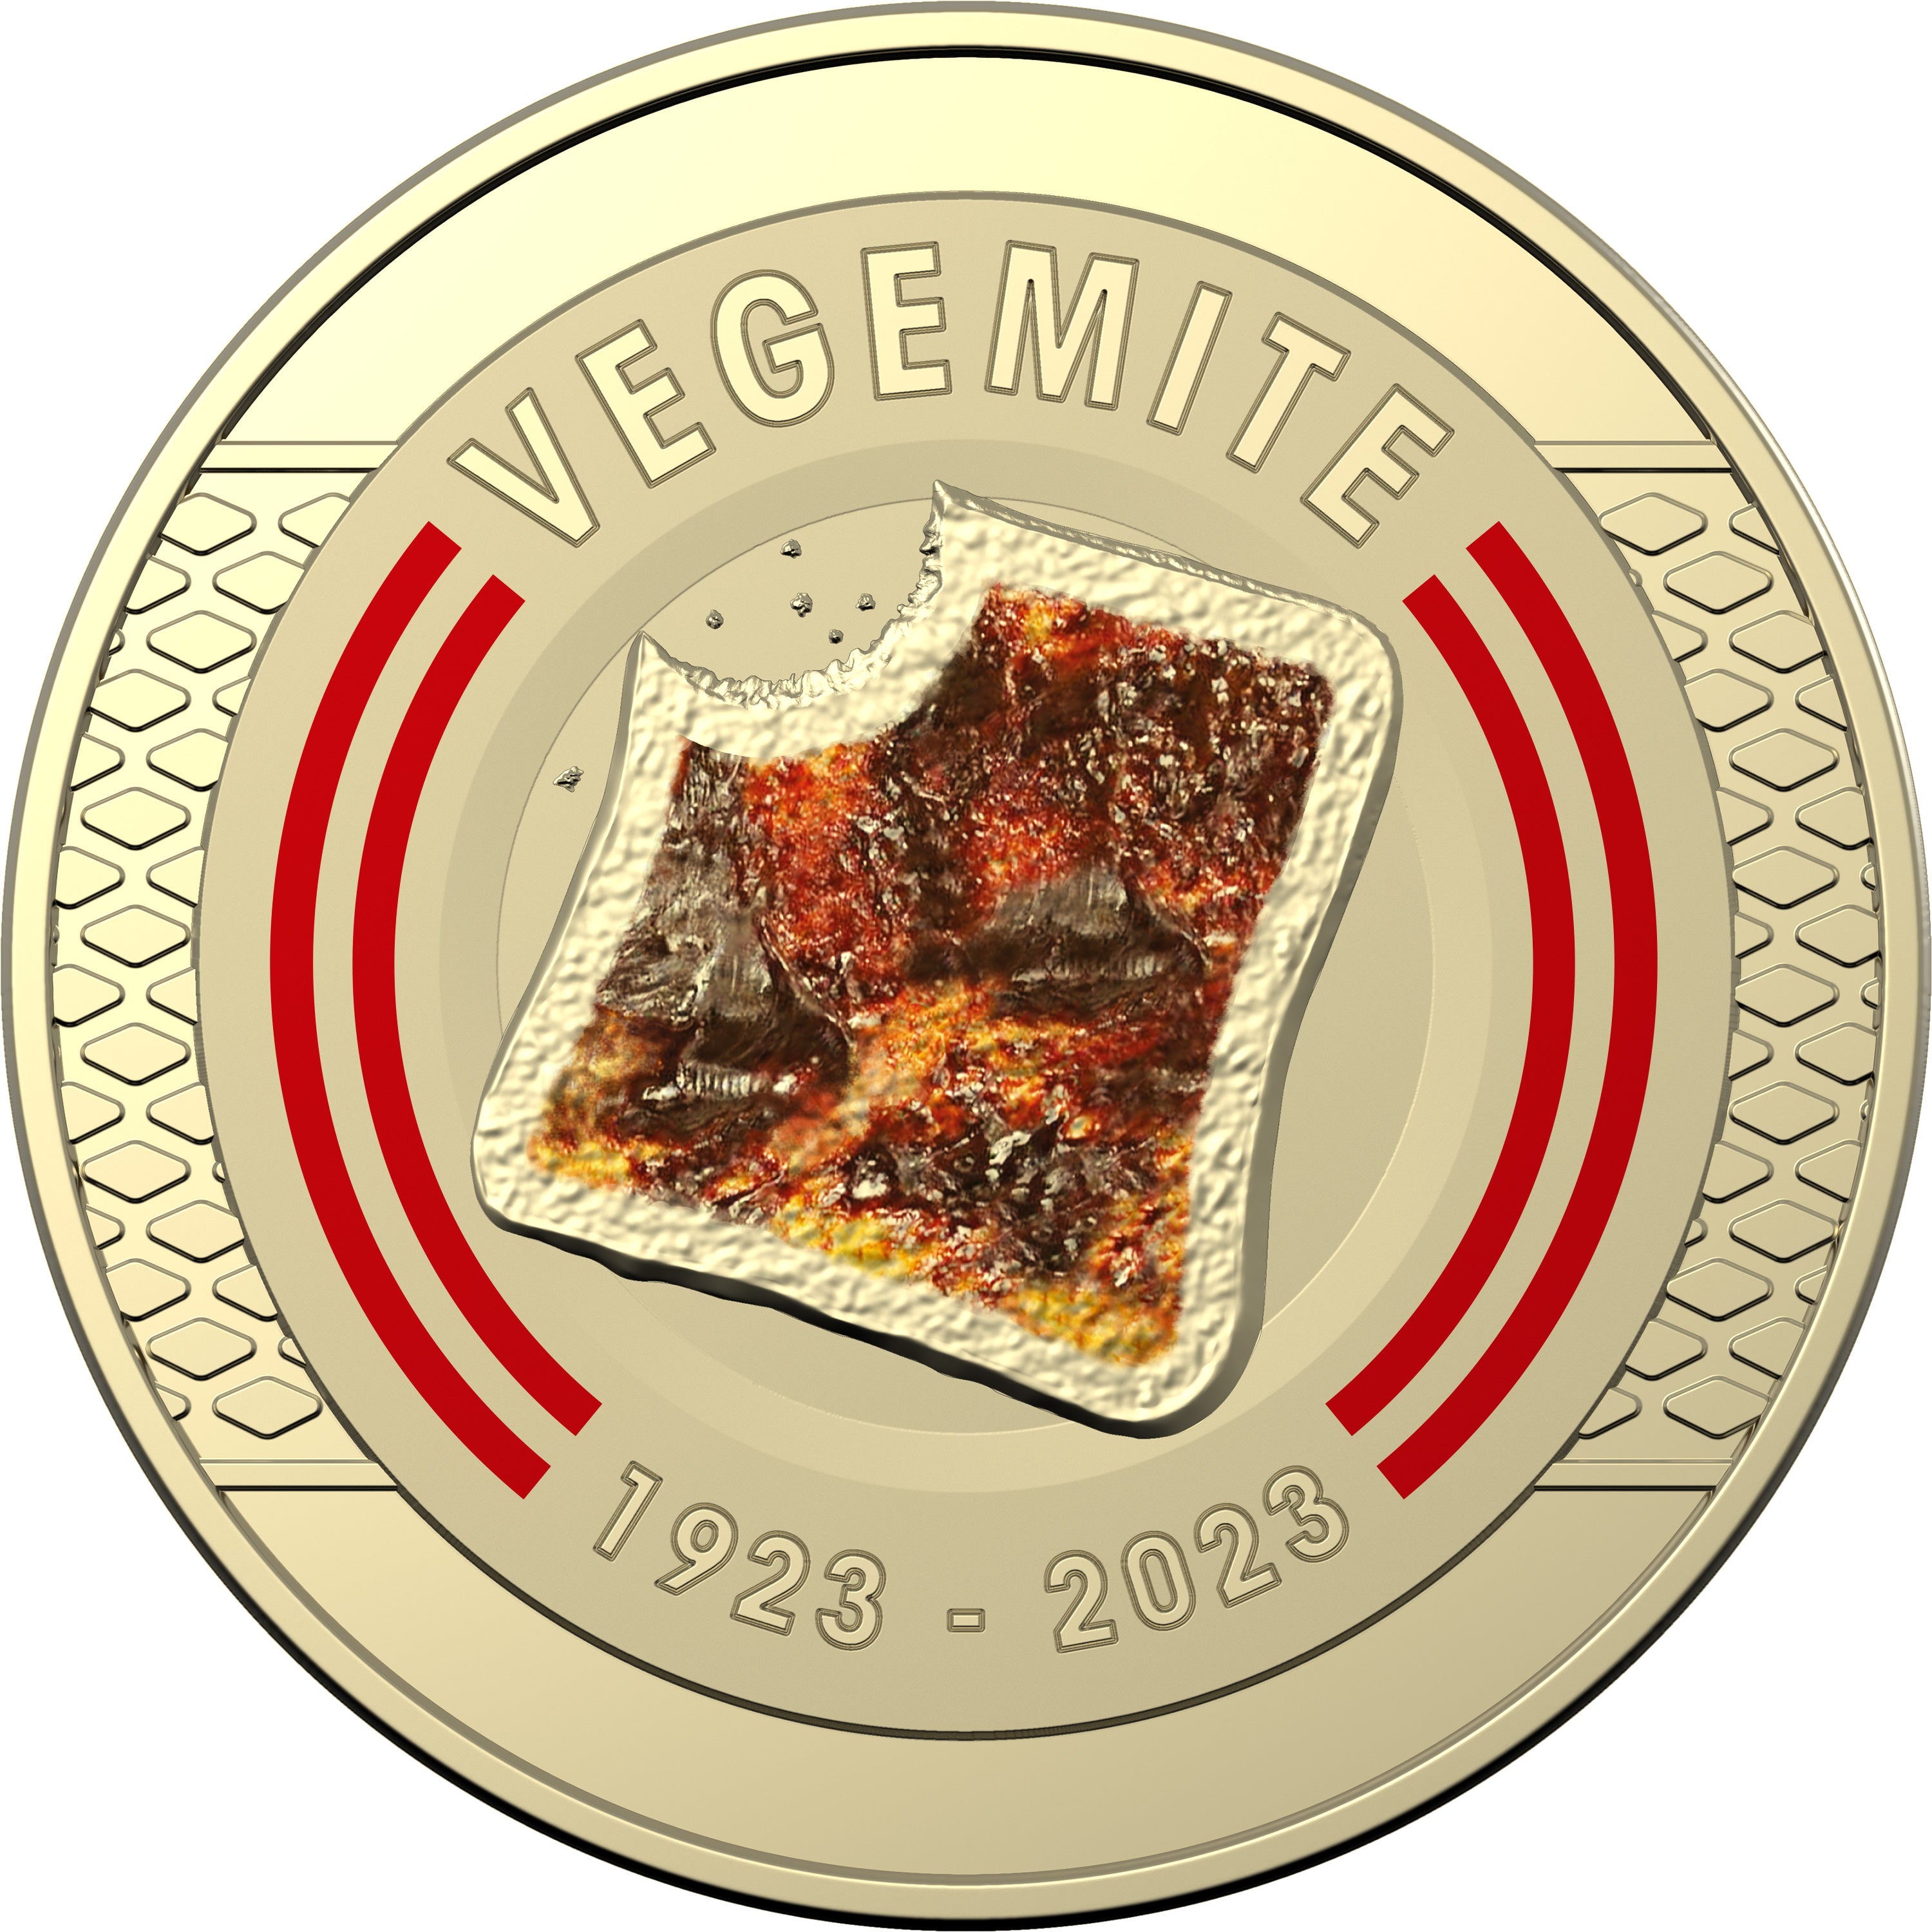 2023 Uncirculated - Centenary of Vegemite - $1.00 Coin Removed from Mint Set